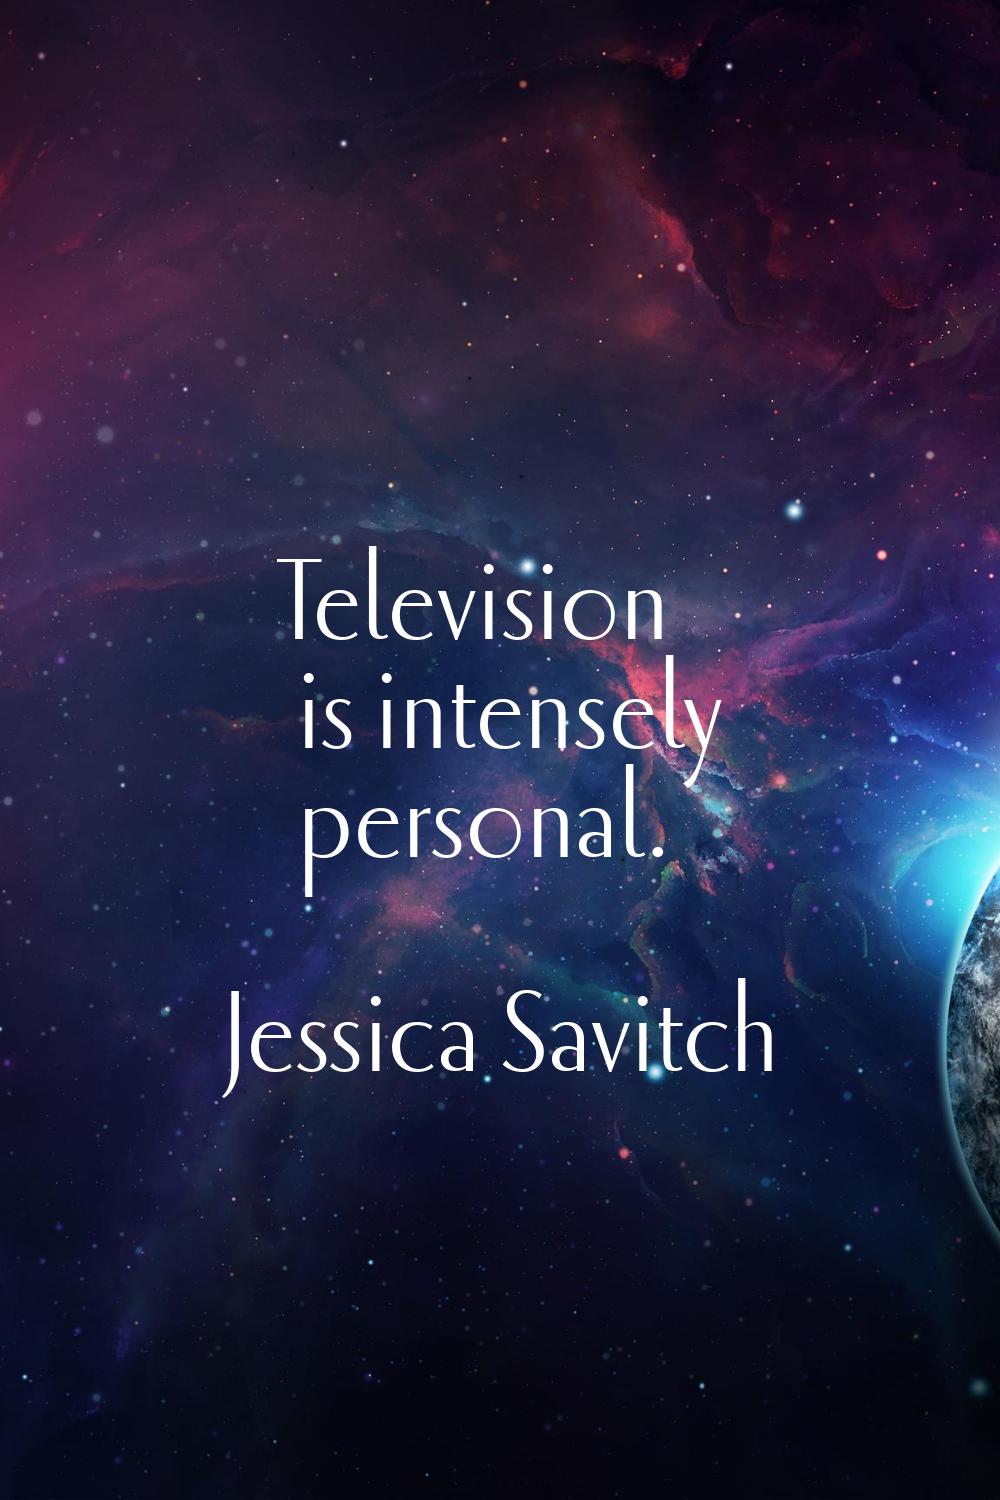 Television is intensely personal.